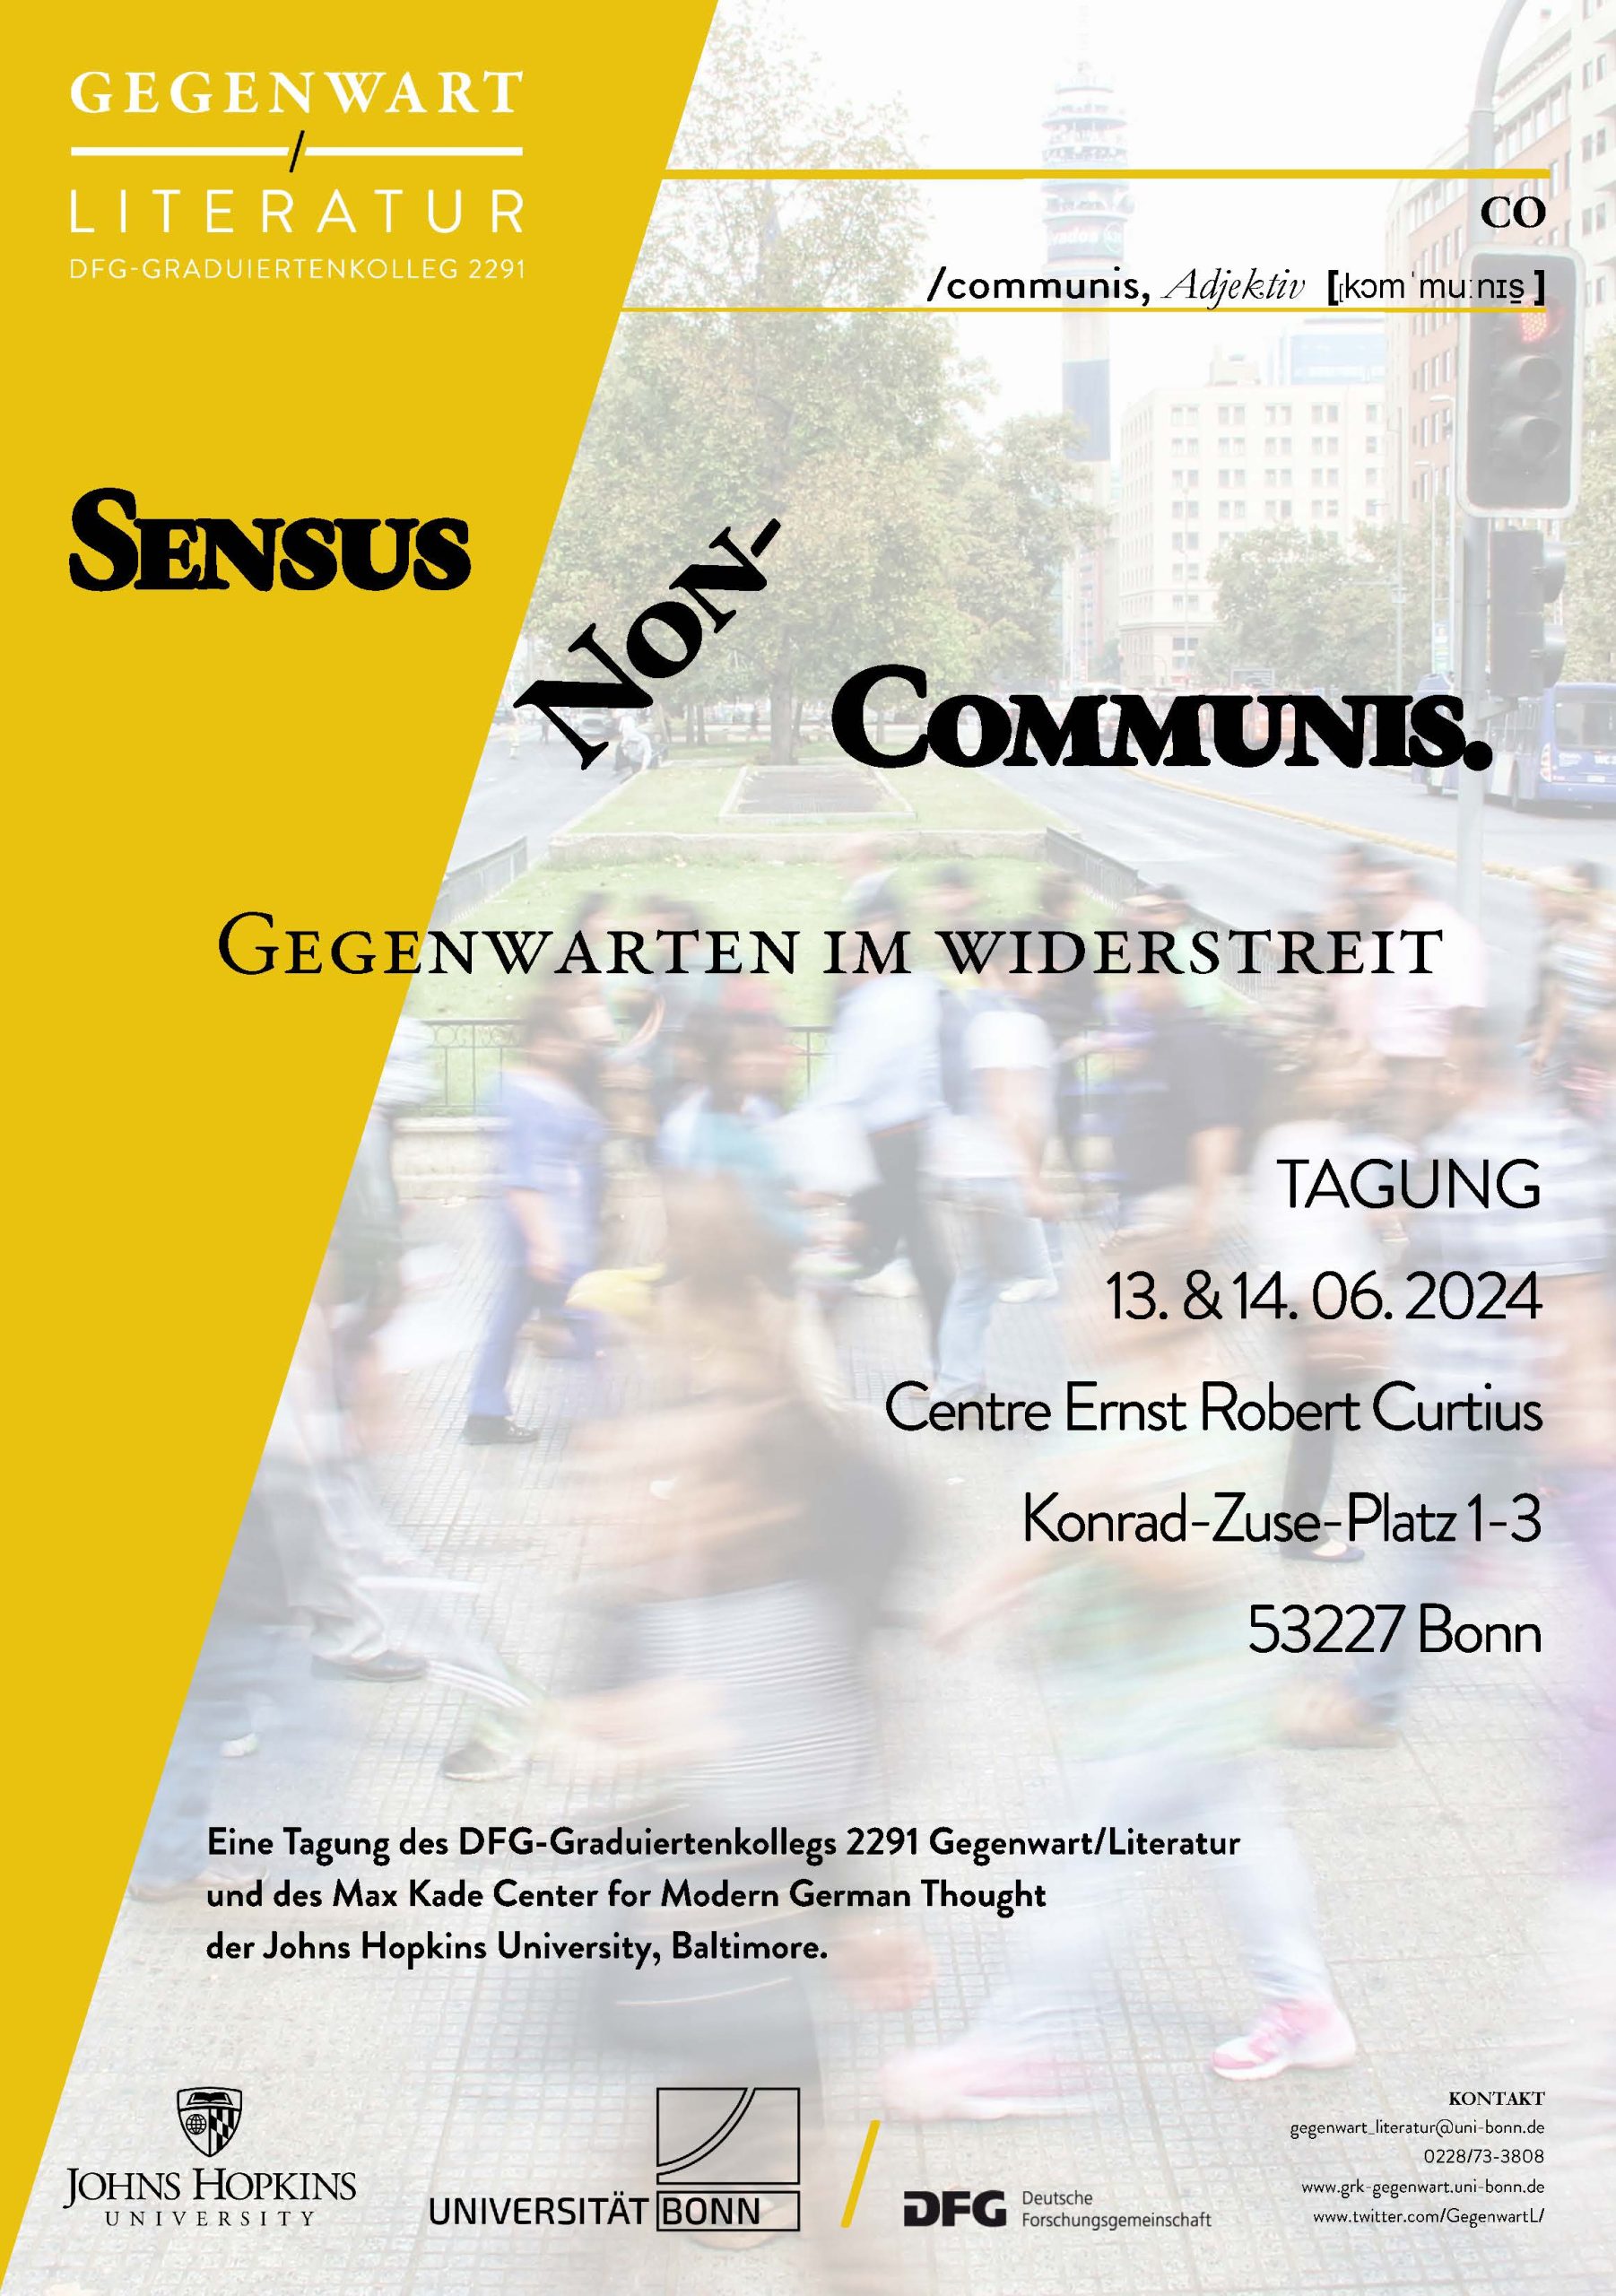 Conference program featuring title, date, location and sponsors against background image of people walking in an urban space.